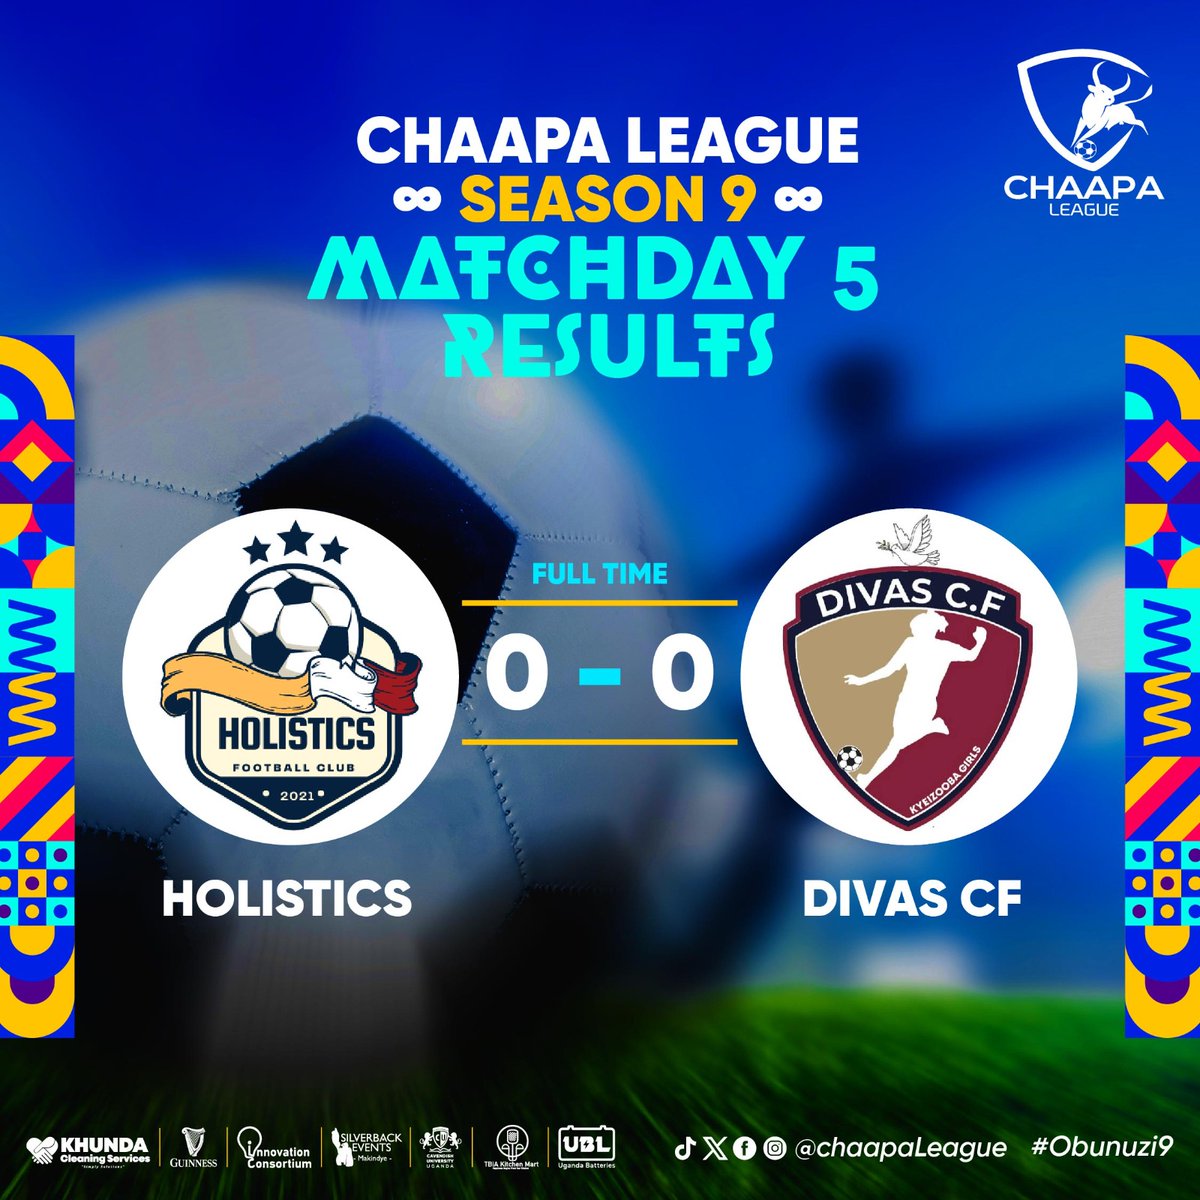 The ladies had nothing to separate them as they settled for a 0-0 draw! @CfDivas and @holisticsfc #Obunuzi9 #Chaapaleague9